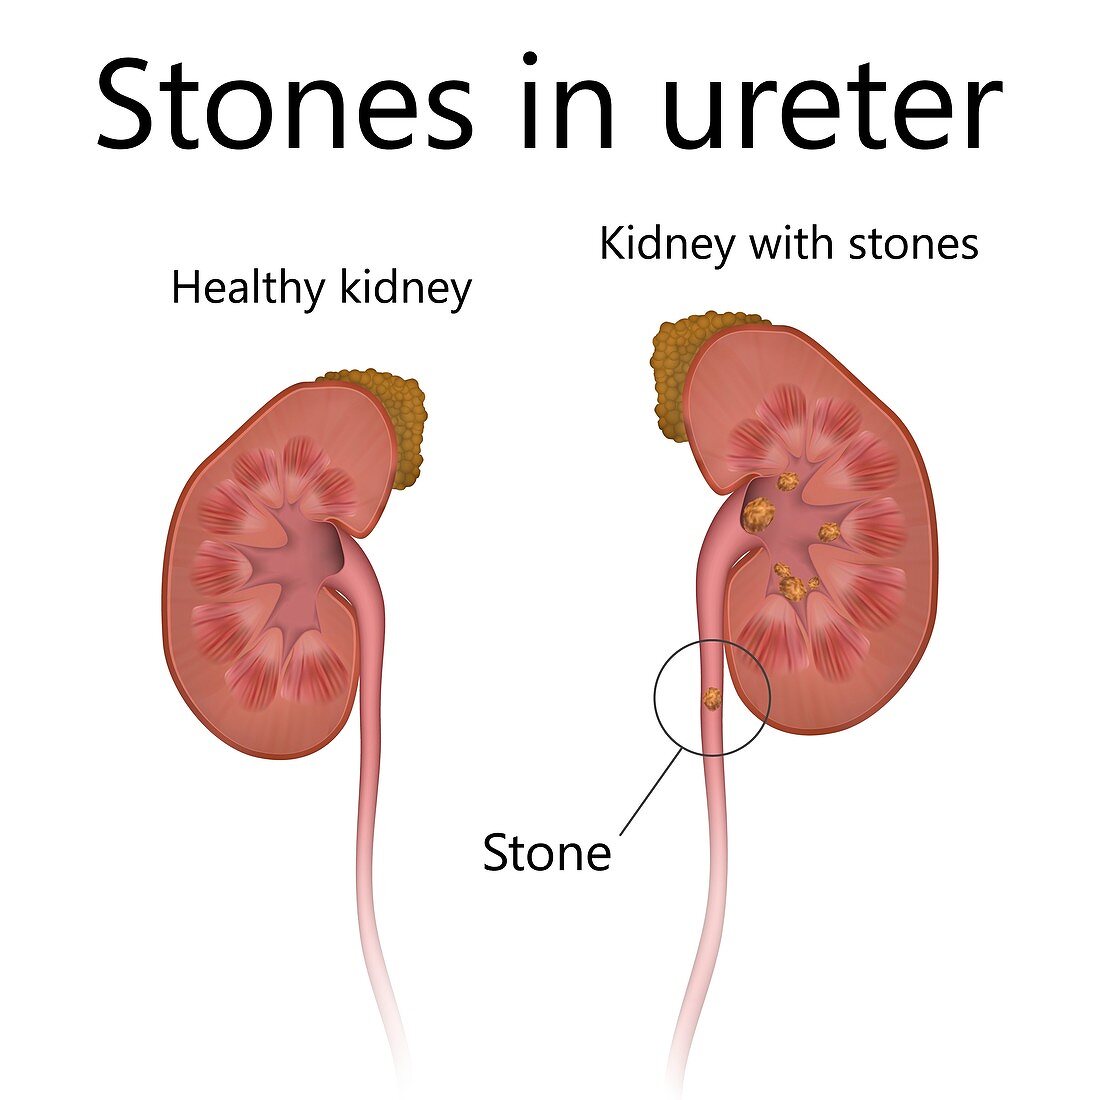 Normal kidney and kidney with stones in ureter, illustration